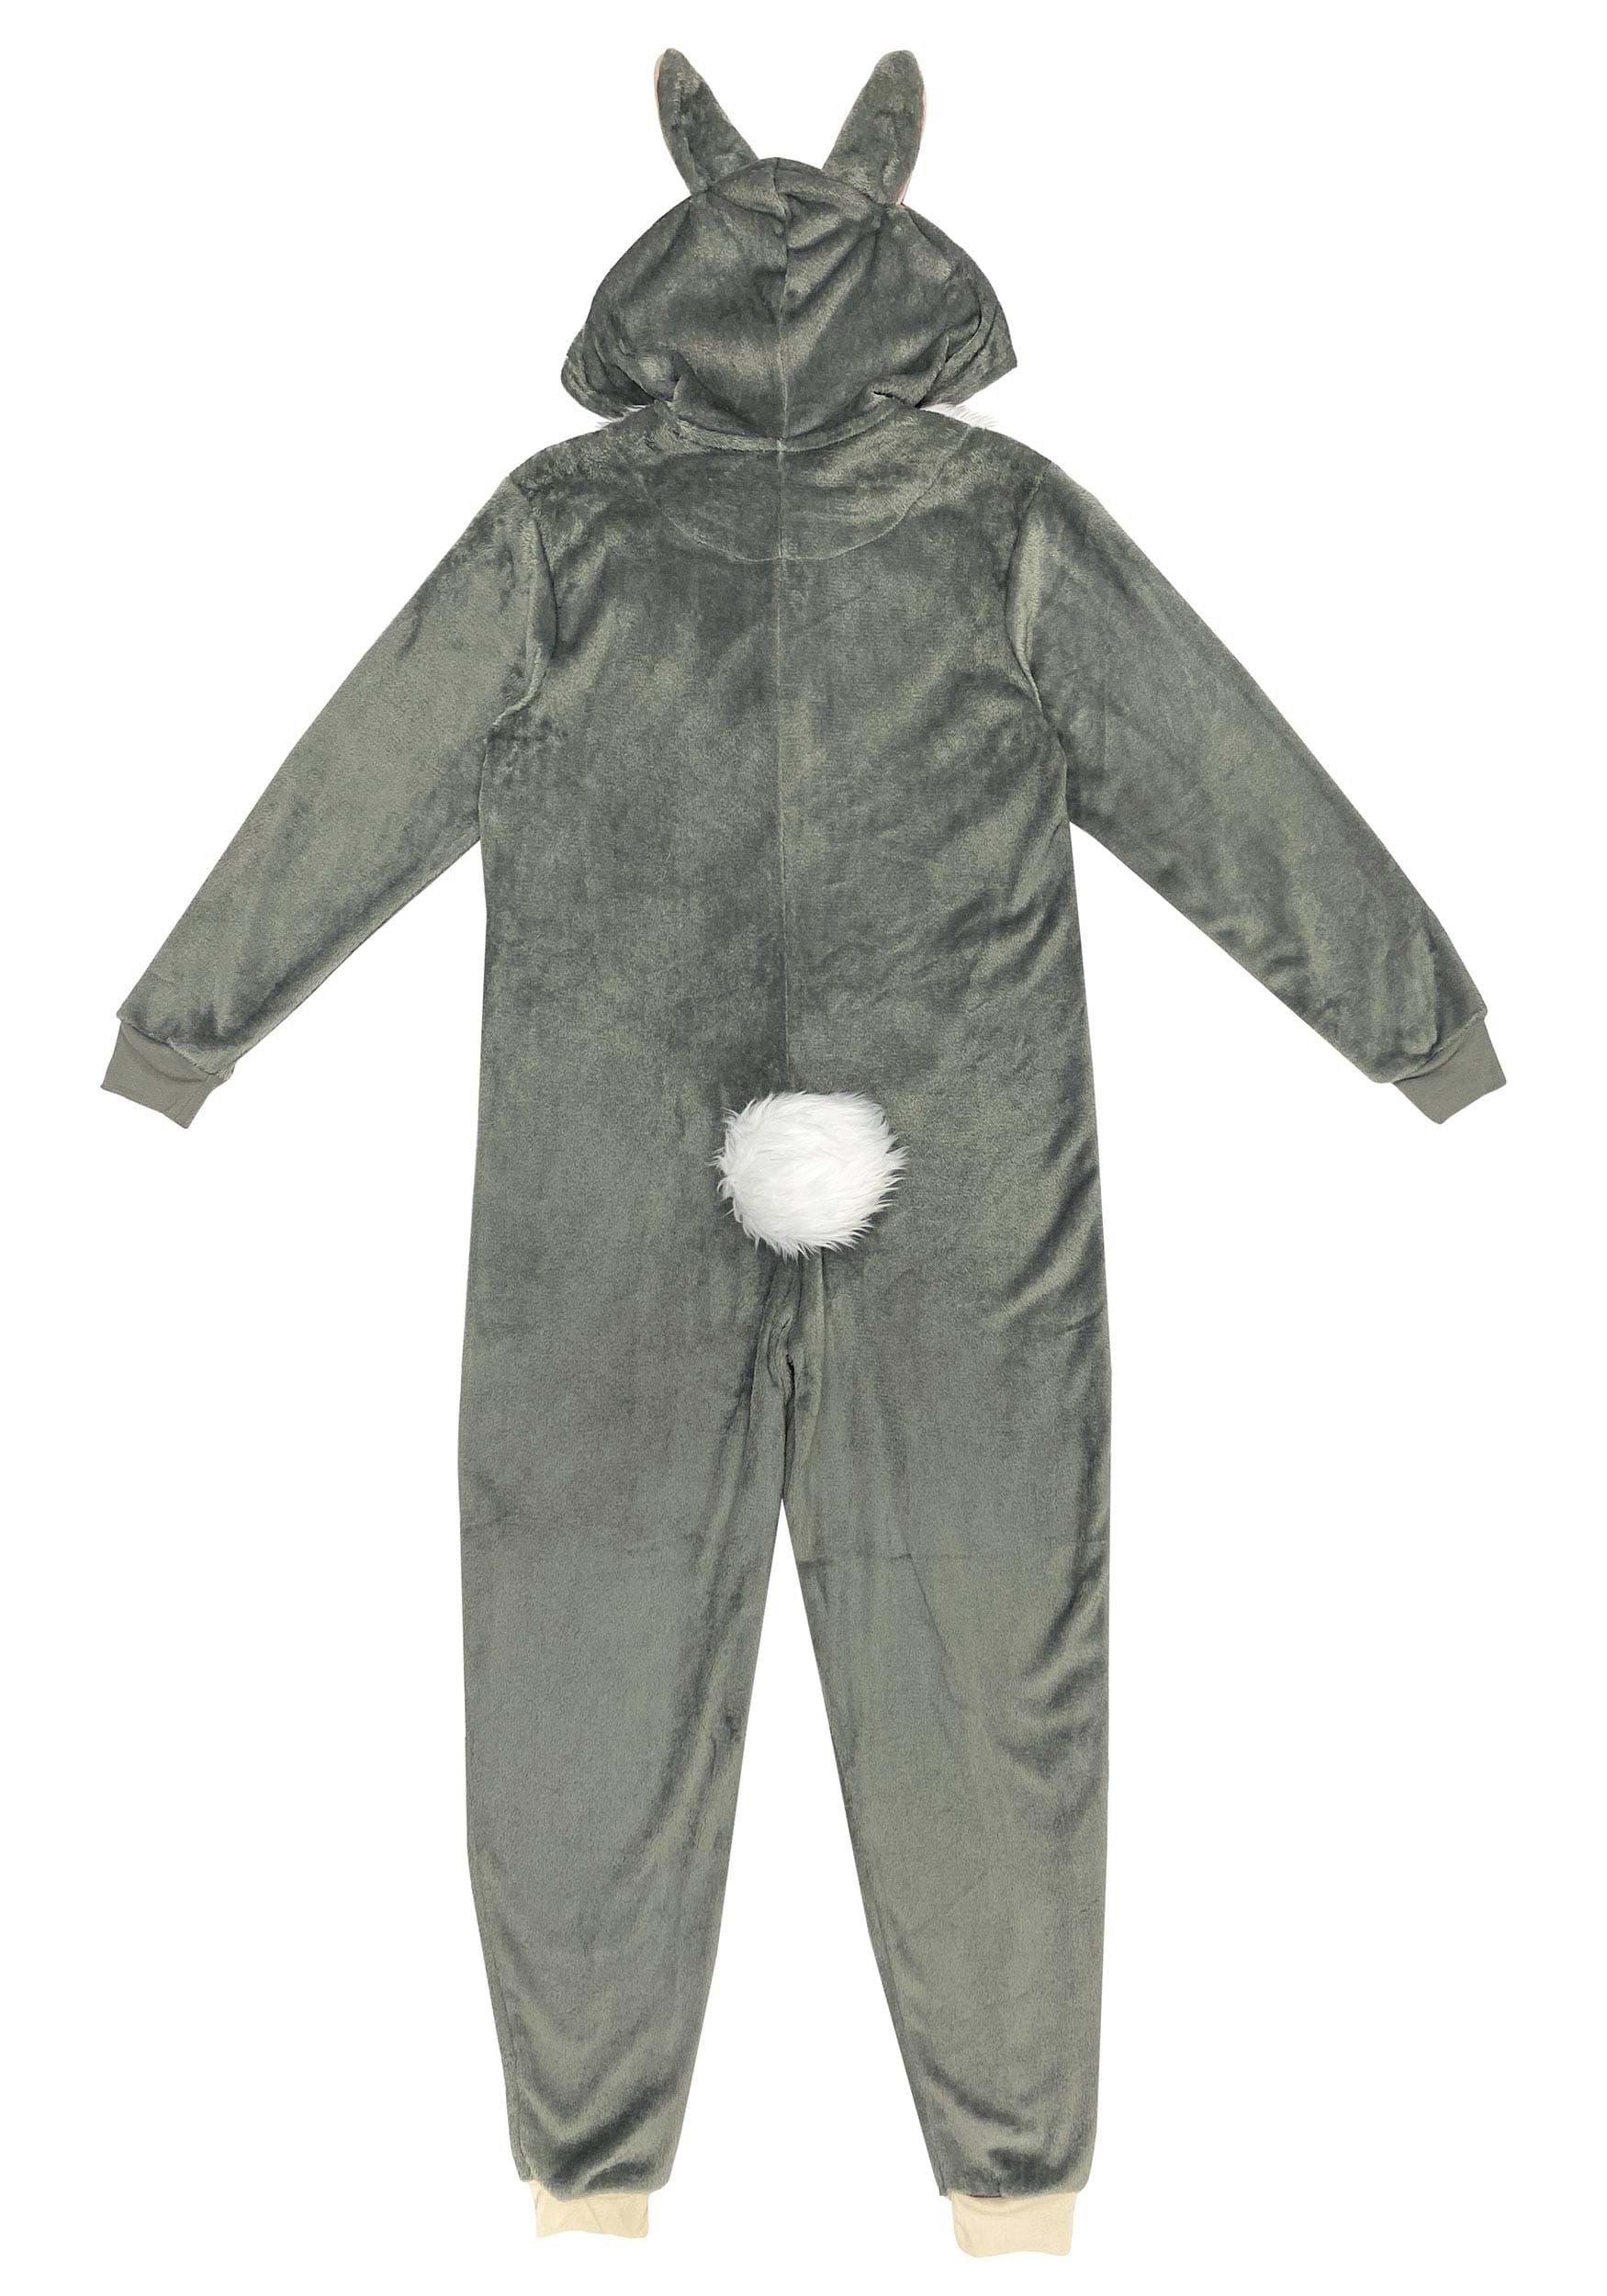 Bambi Thumper Union Suit for Adults